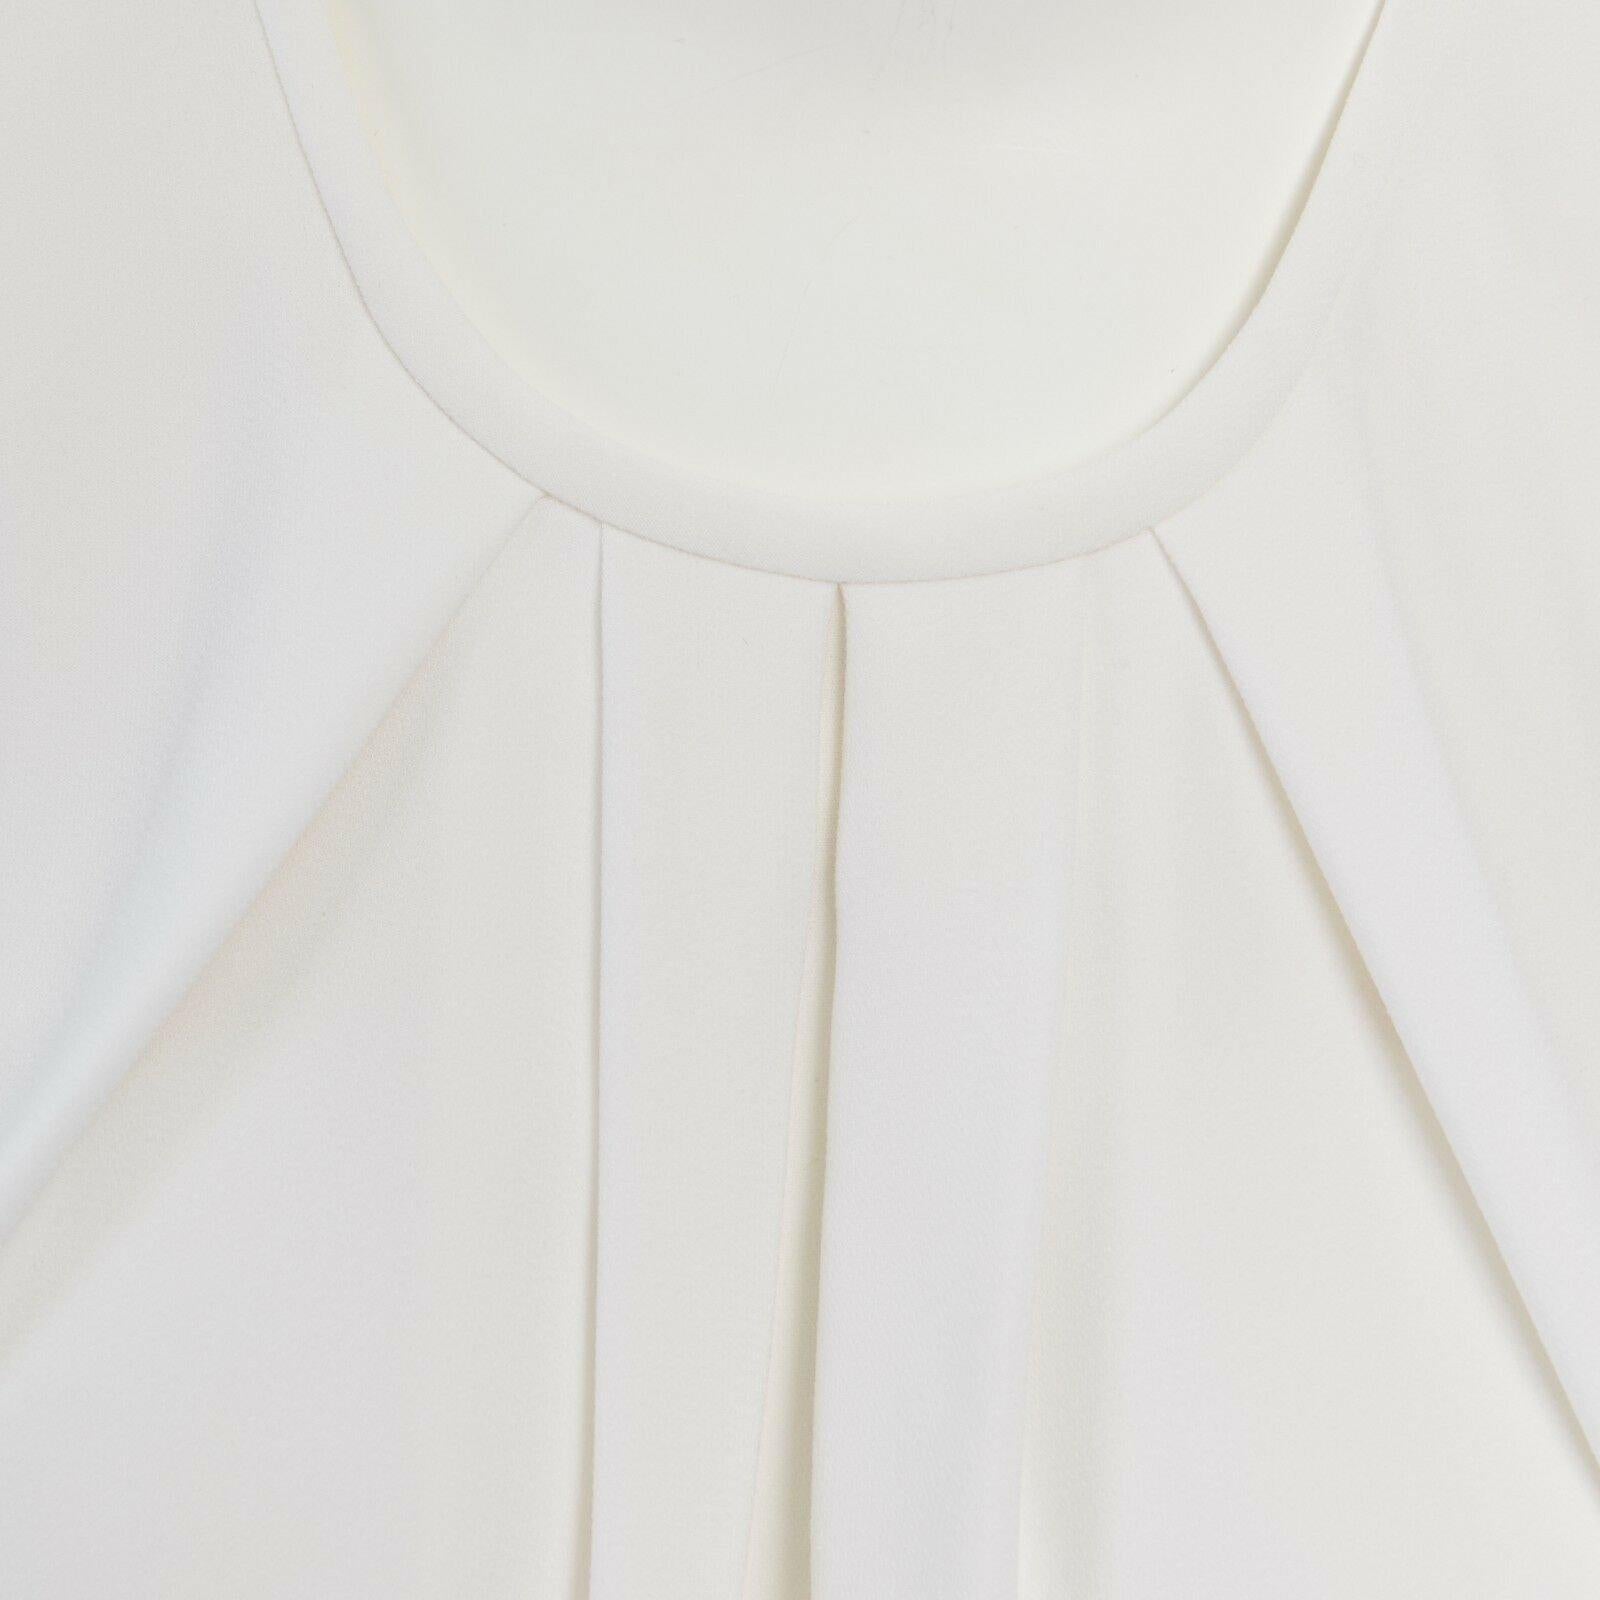 BALENCIAGA 2012 white crepe rounded sleeves blouse top FR36 S 2